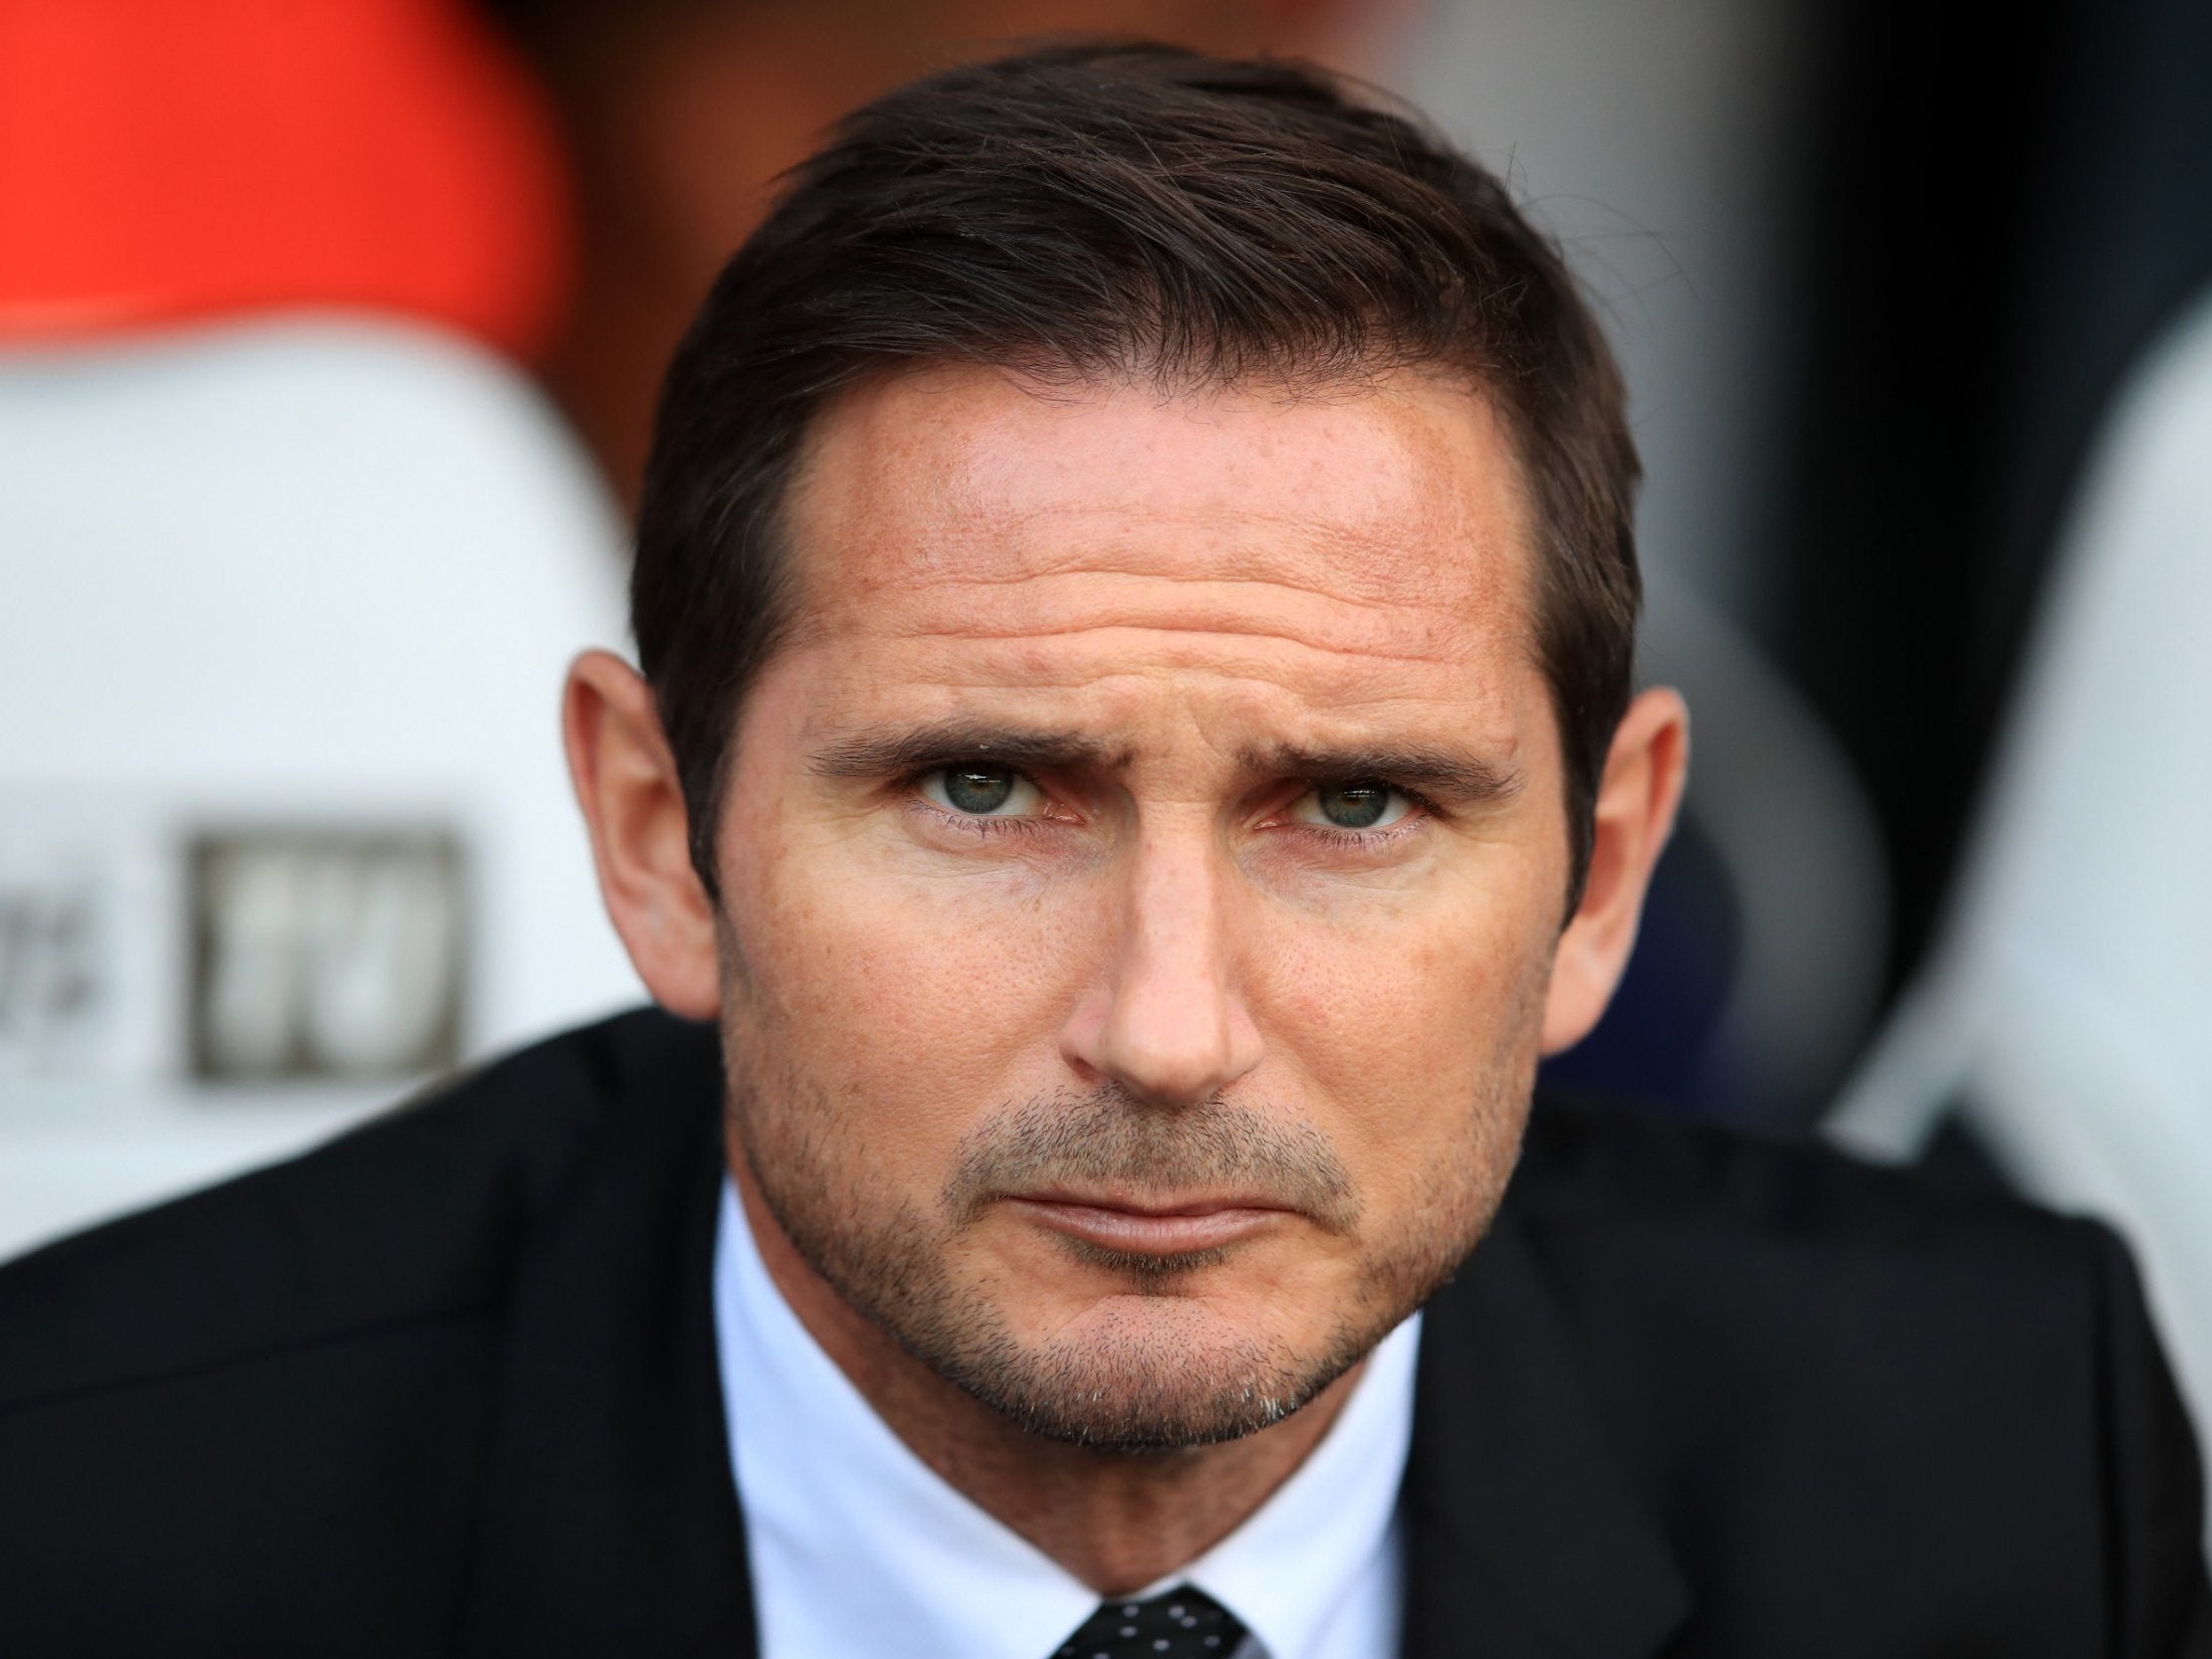 Lampard was shown red as his frustrations got the better of him